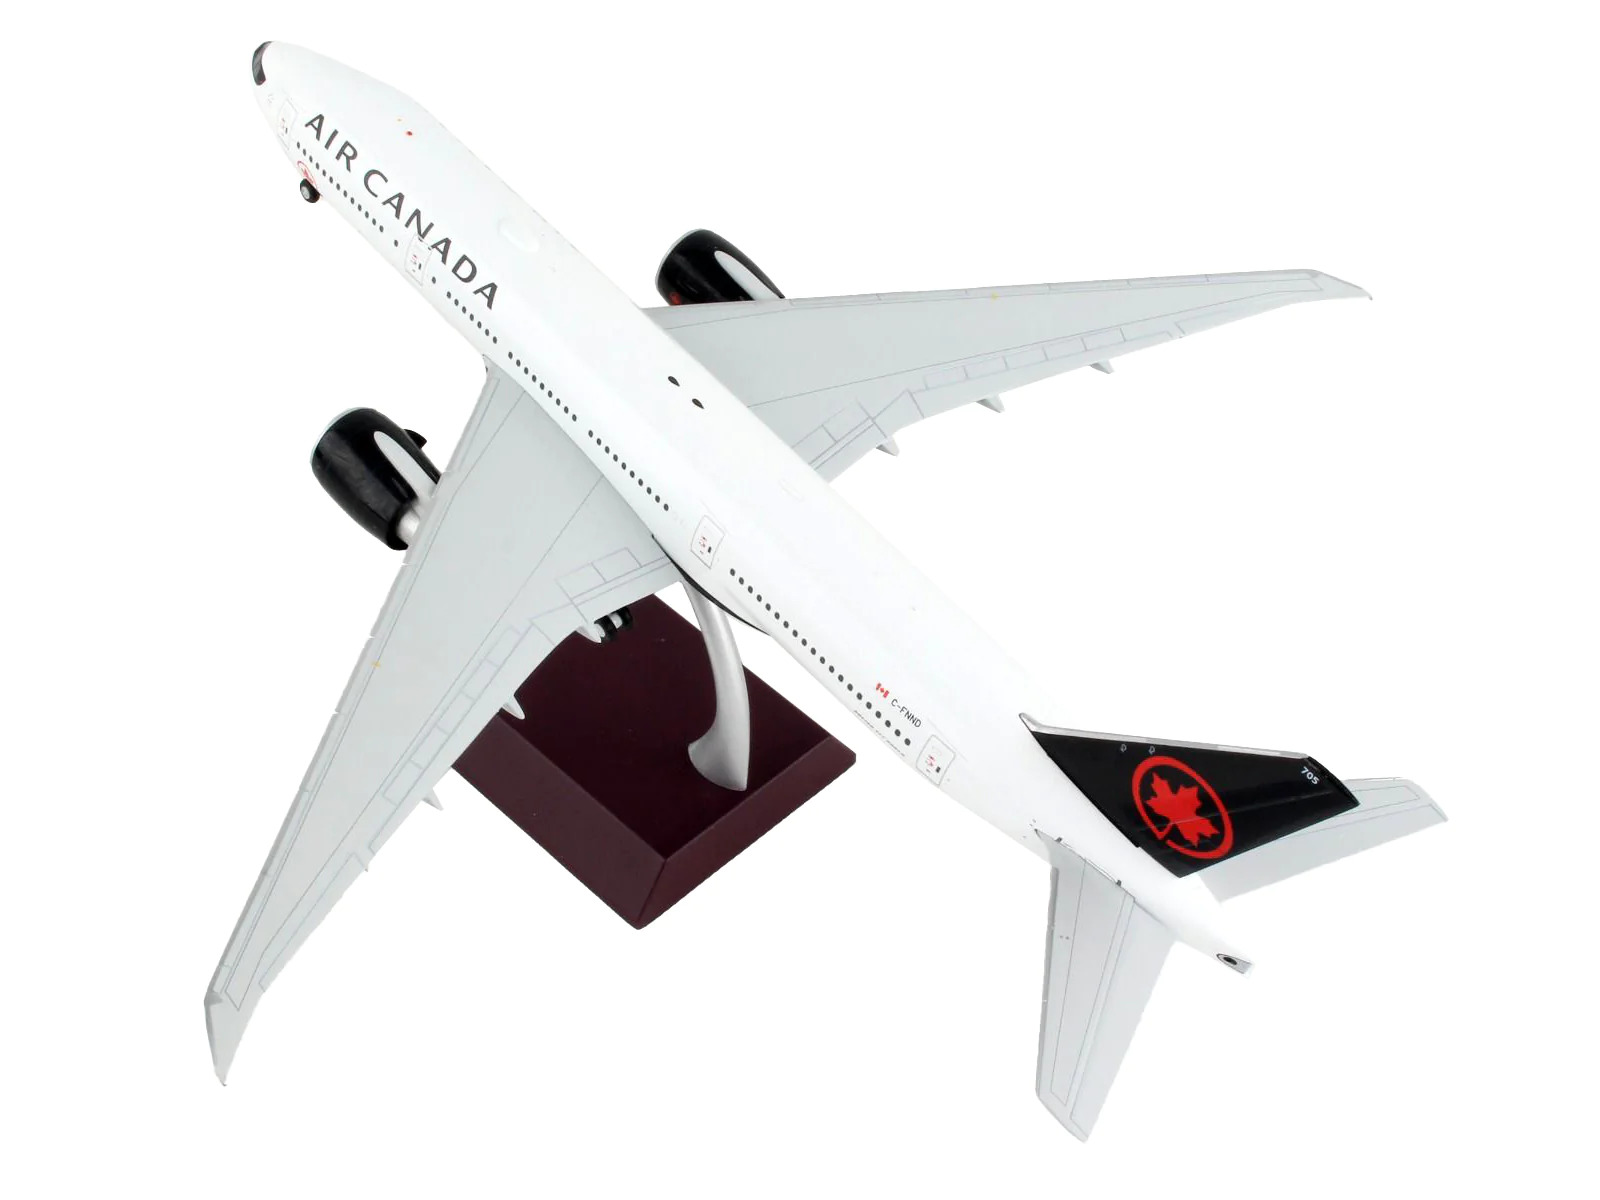 Boeing 777-200LR Commercial Canada Tail Gemini 200 1/200 Diecast Model Airplane